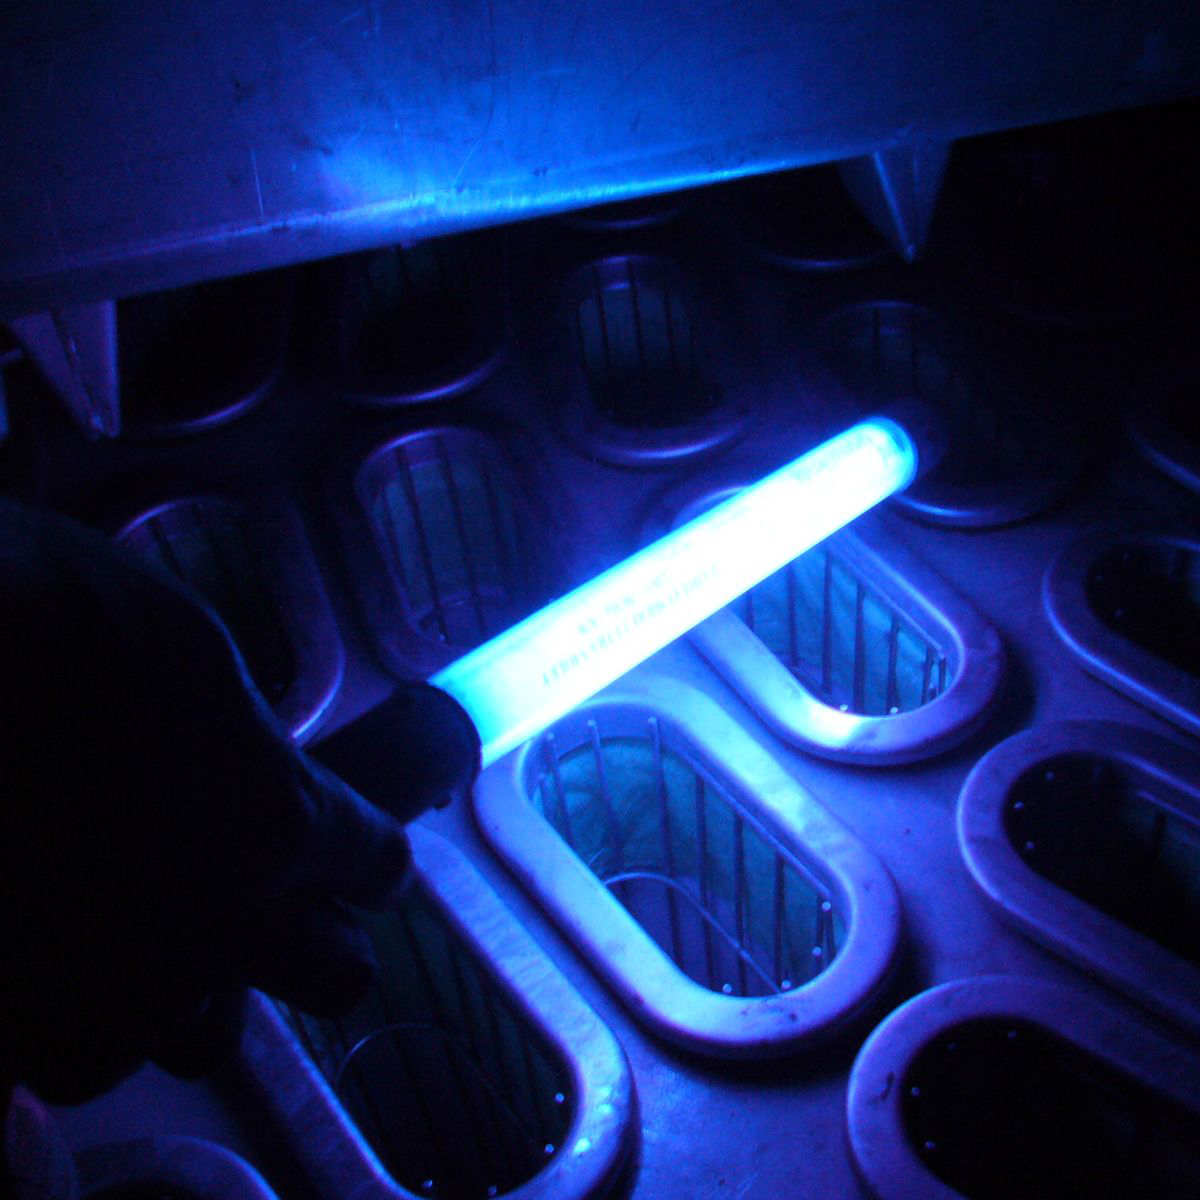 UV lamp inspection of sleeve filters tested with Fluodust.